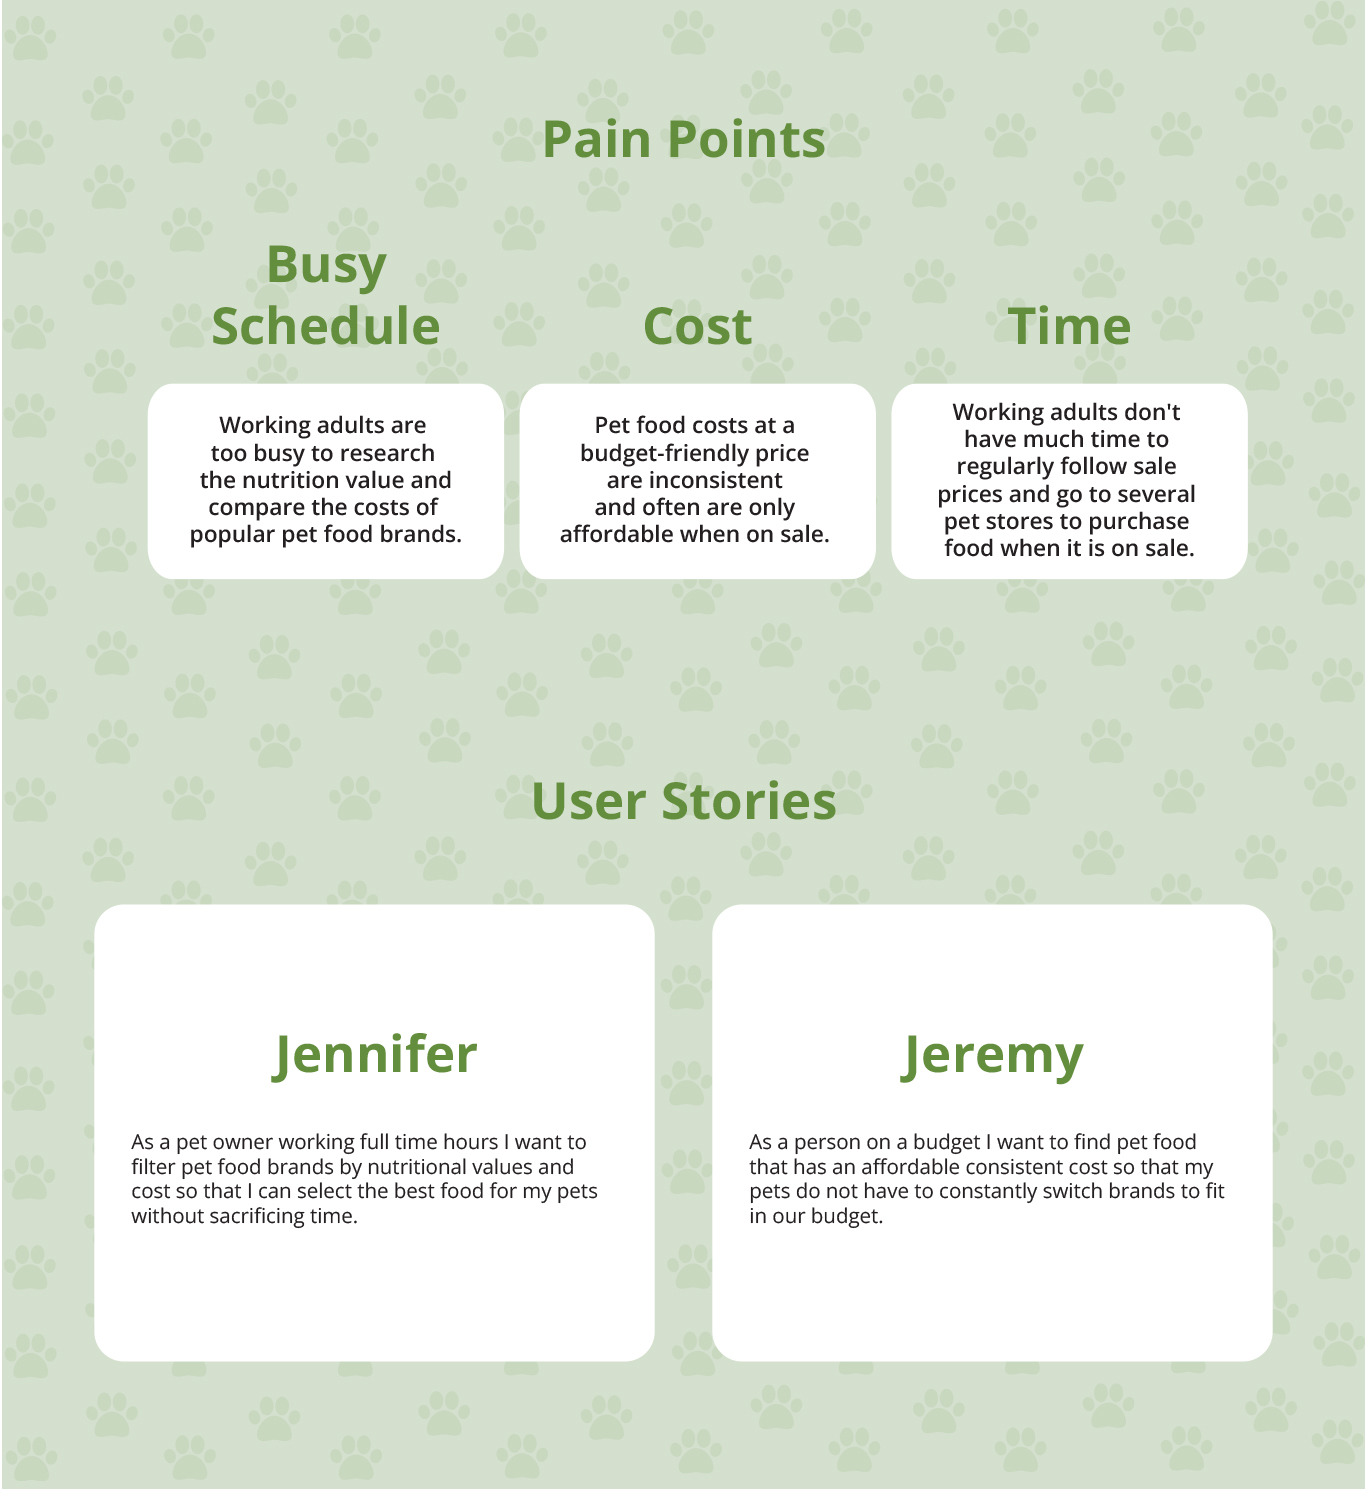 Pet People App Pain Points and User Stories Image